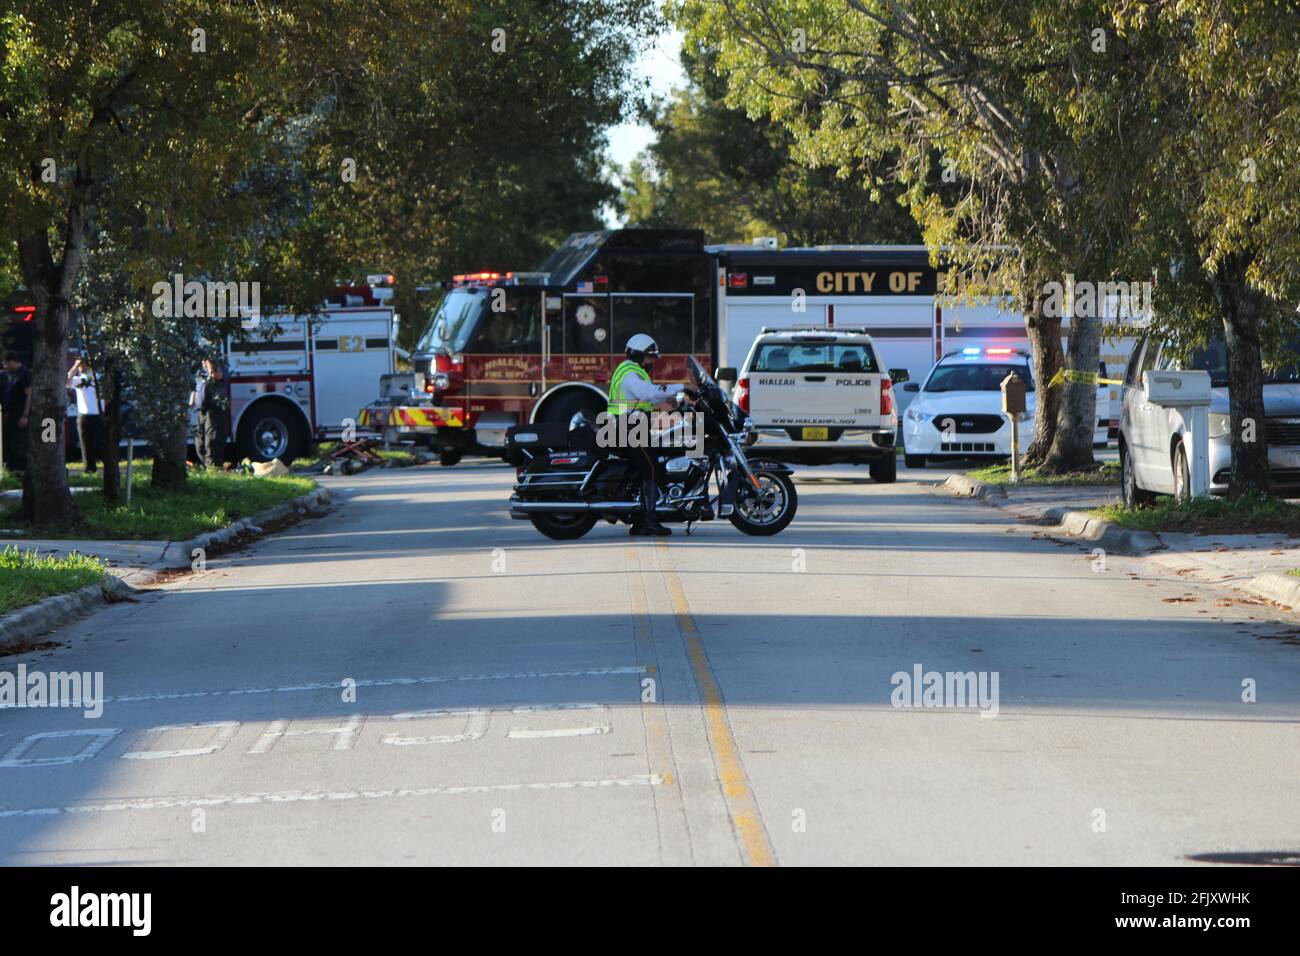 Hialeah Police officers and Fire Fighters arrive to a halt of a car chase crime scene where they blocked off many streets. Miami Dade county. Stock Photo